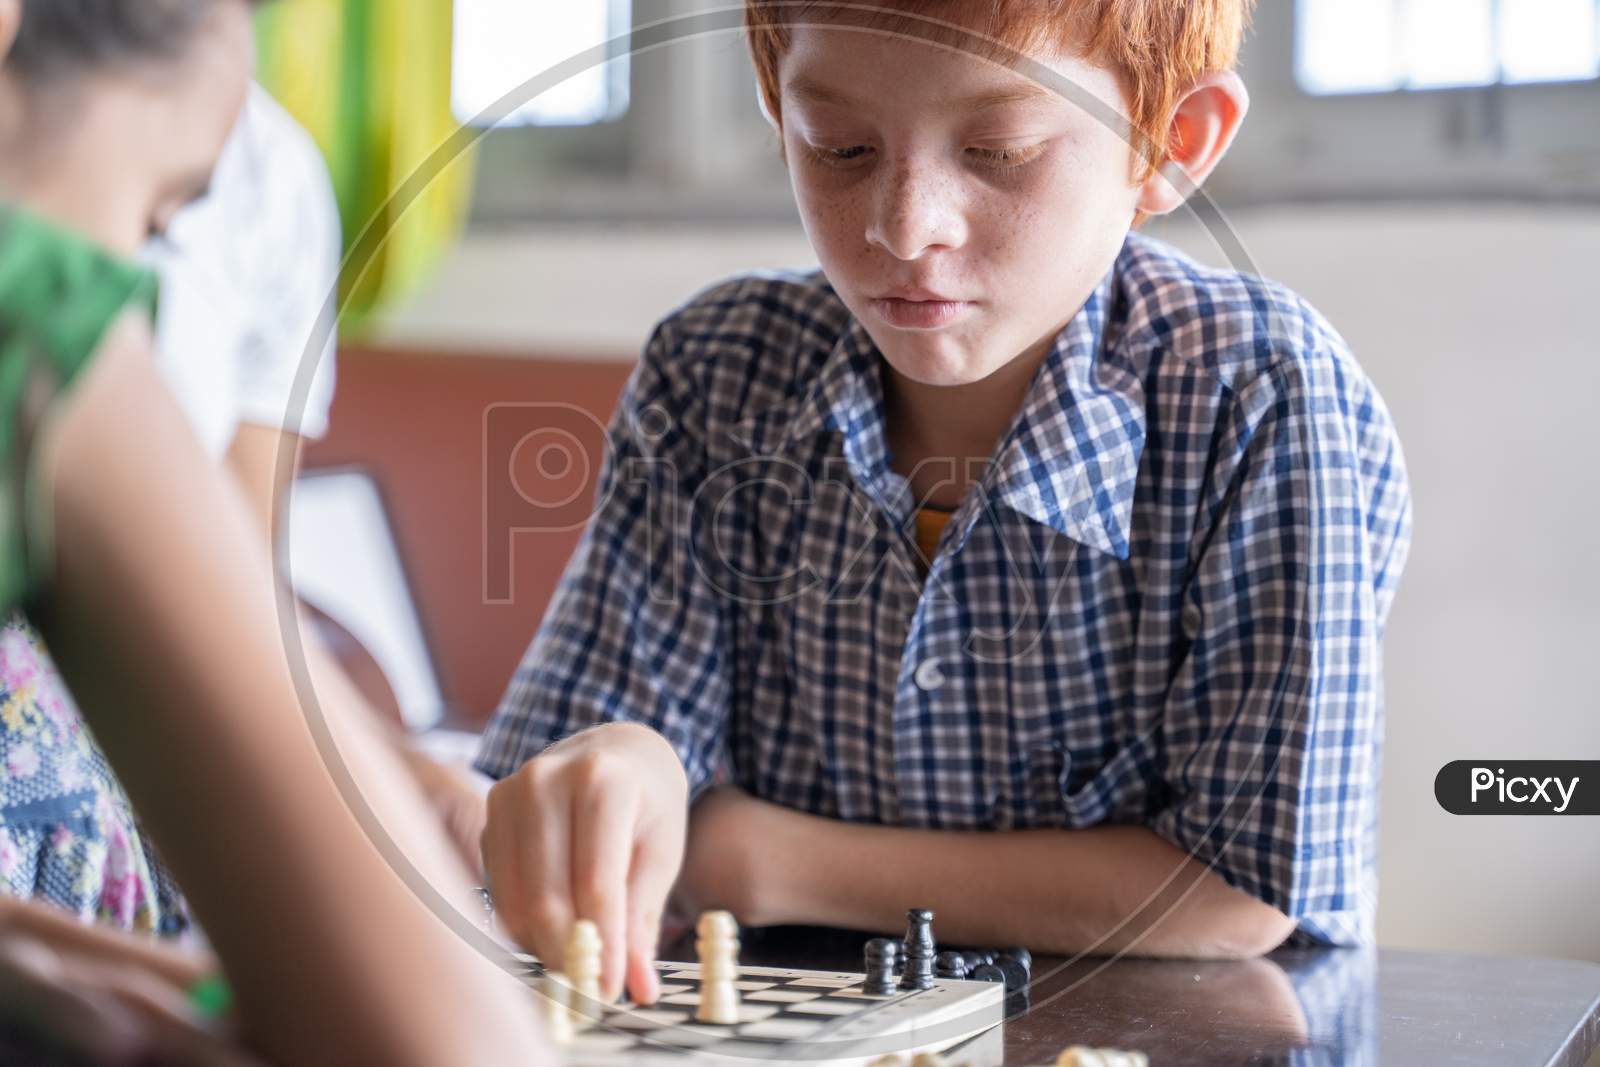 Serious Chess Player Kid Thinking And Moving Coin At Home - Concept Of Kid Concentration Of Game During Early Development, Home Educational Games For Children